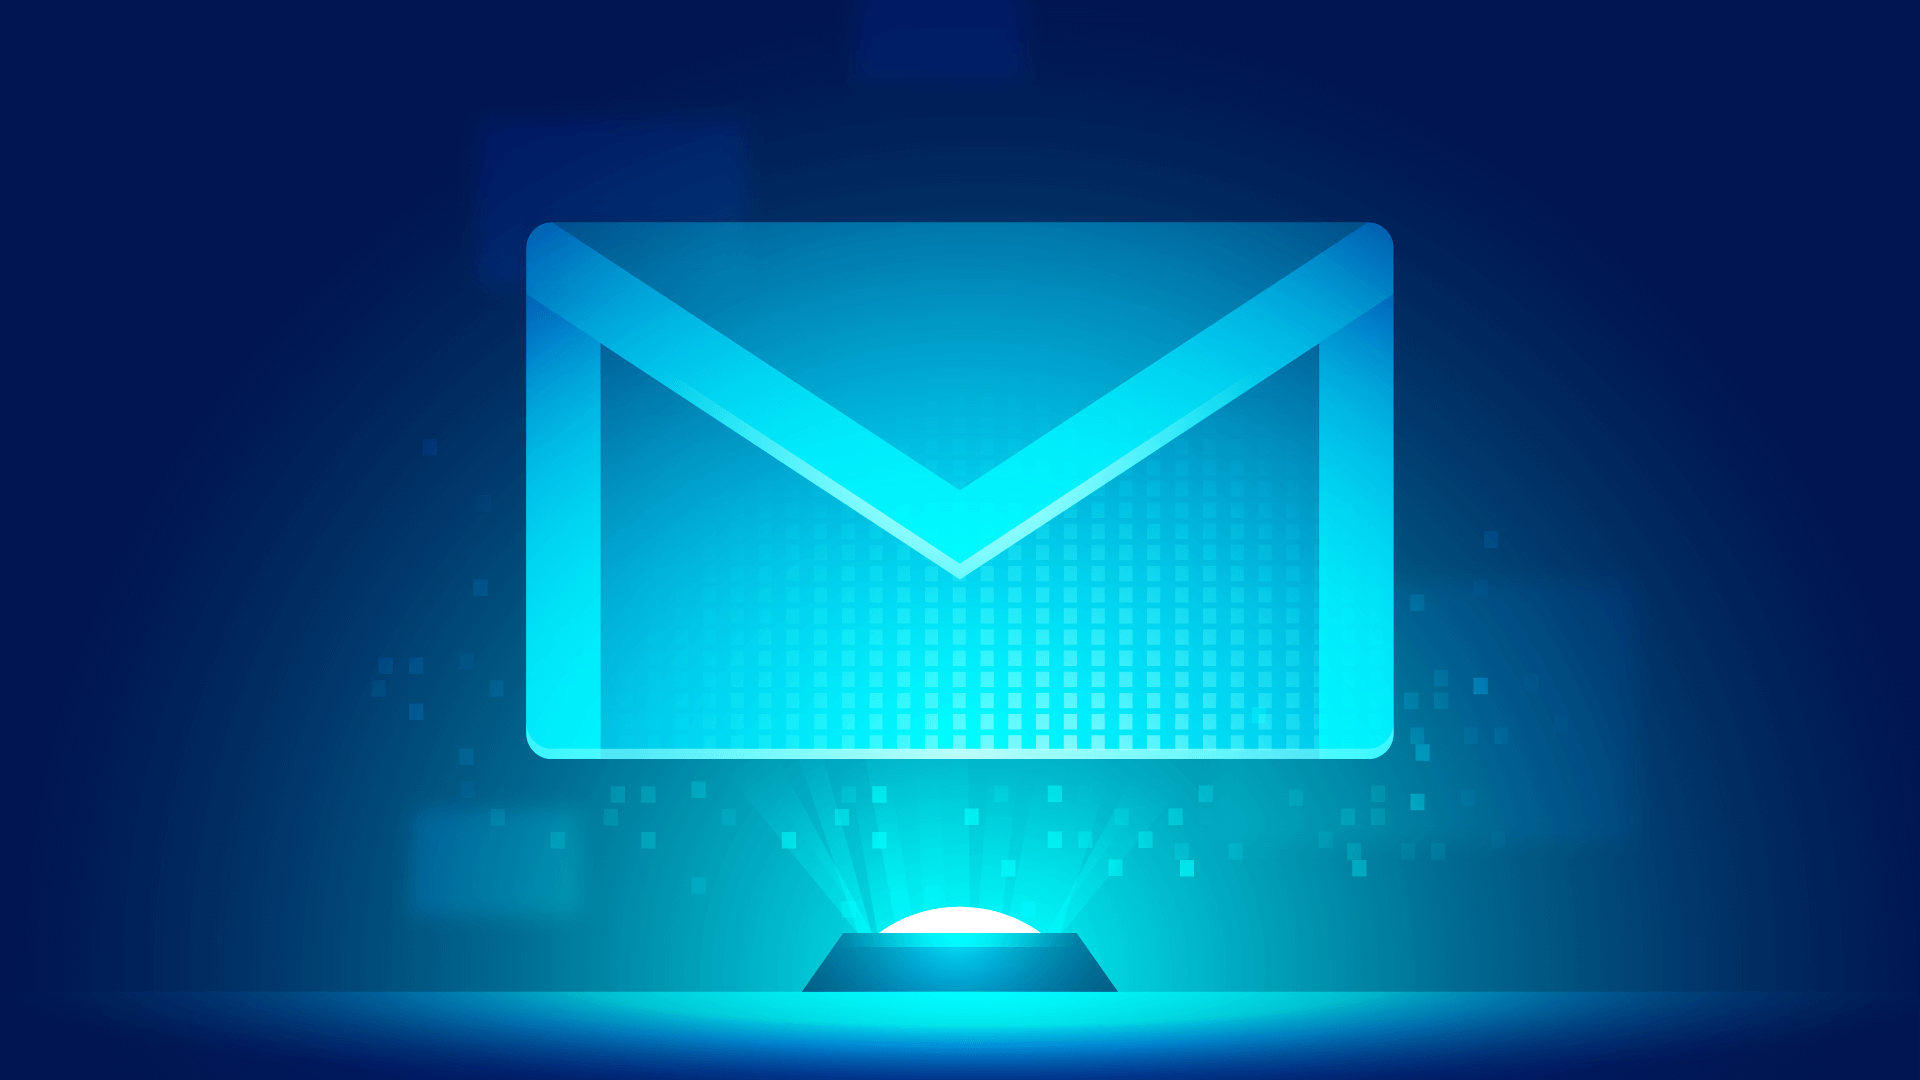 Build a Gmail Clone with Vue 3